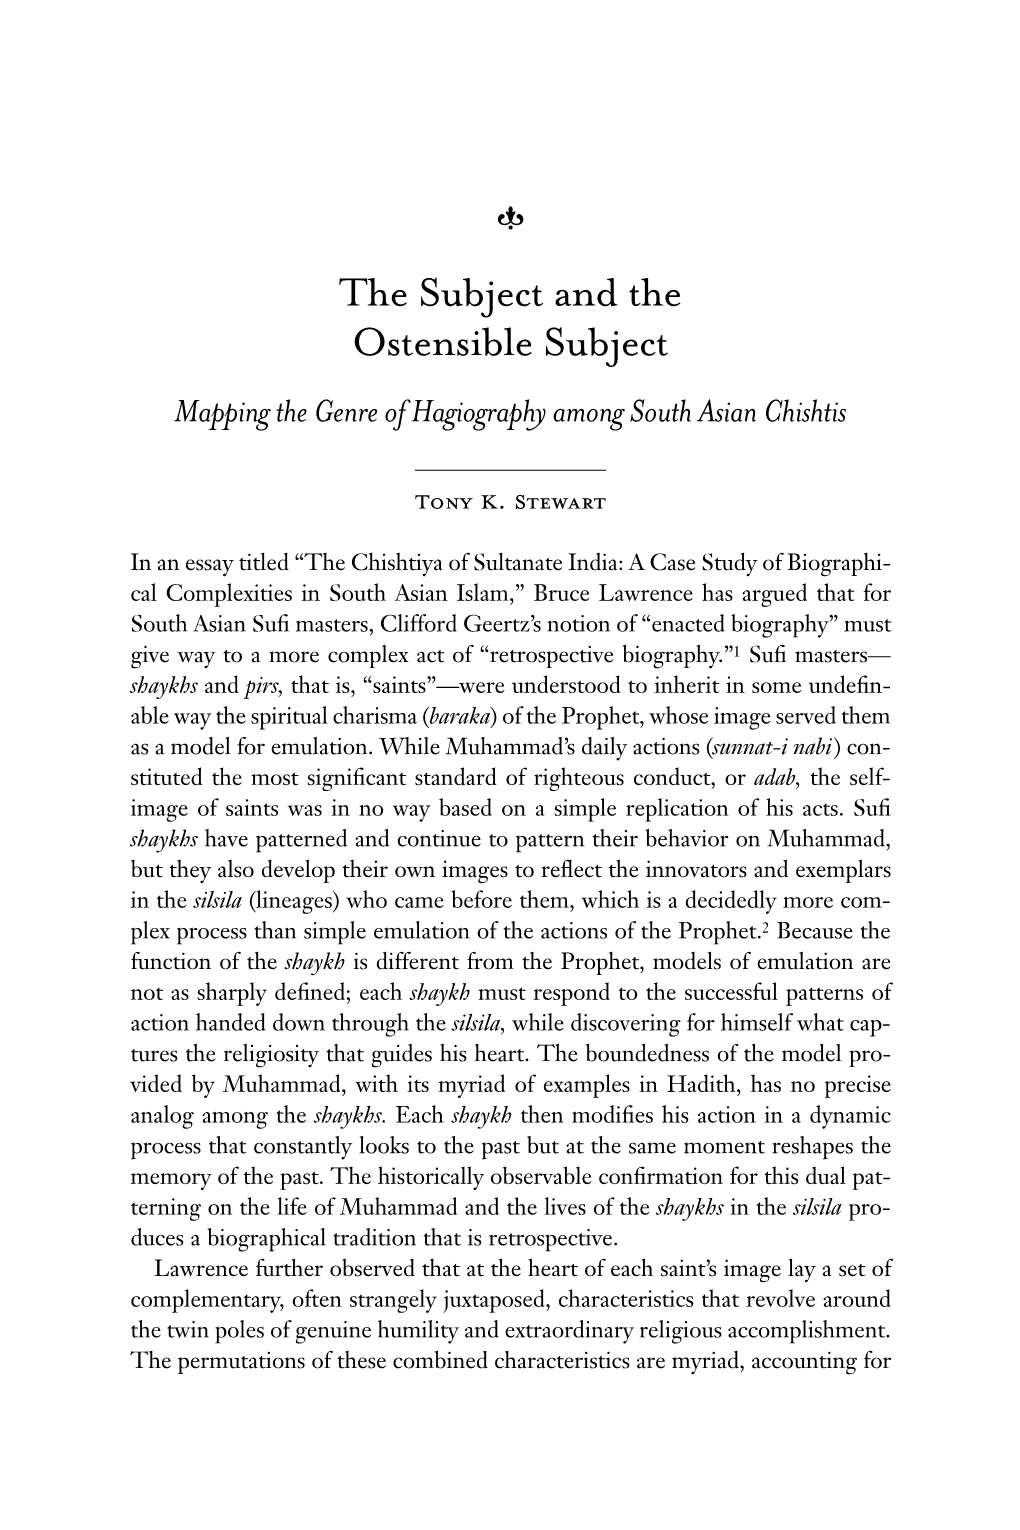 The Subject and the Ostensible Subject Mapping the Genre of Hagiography Among South Asian Chishtis